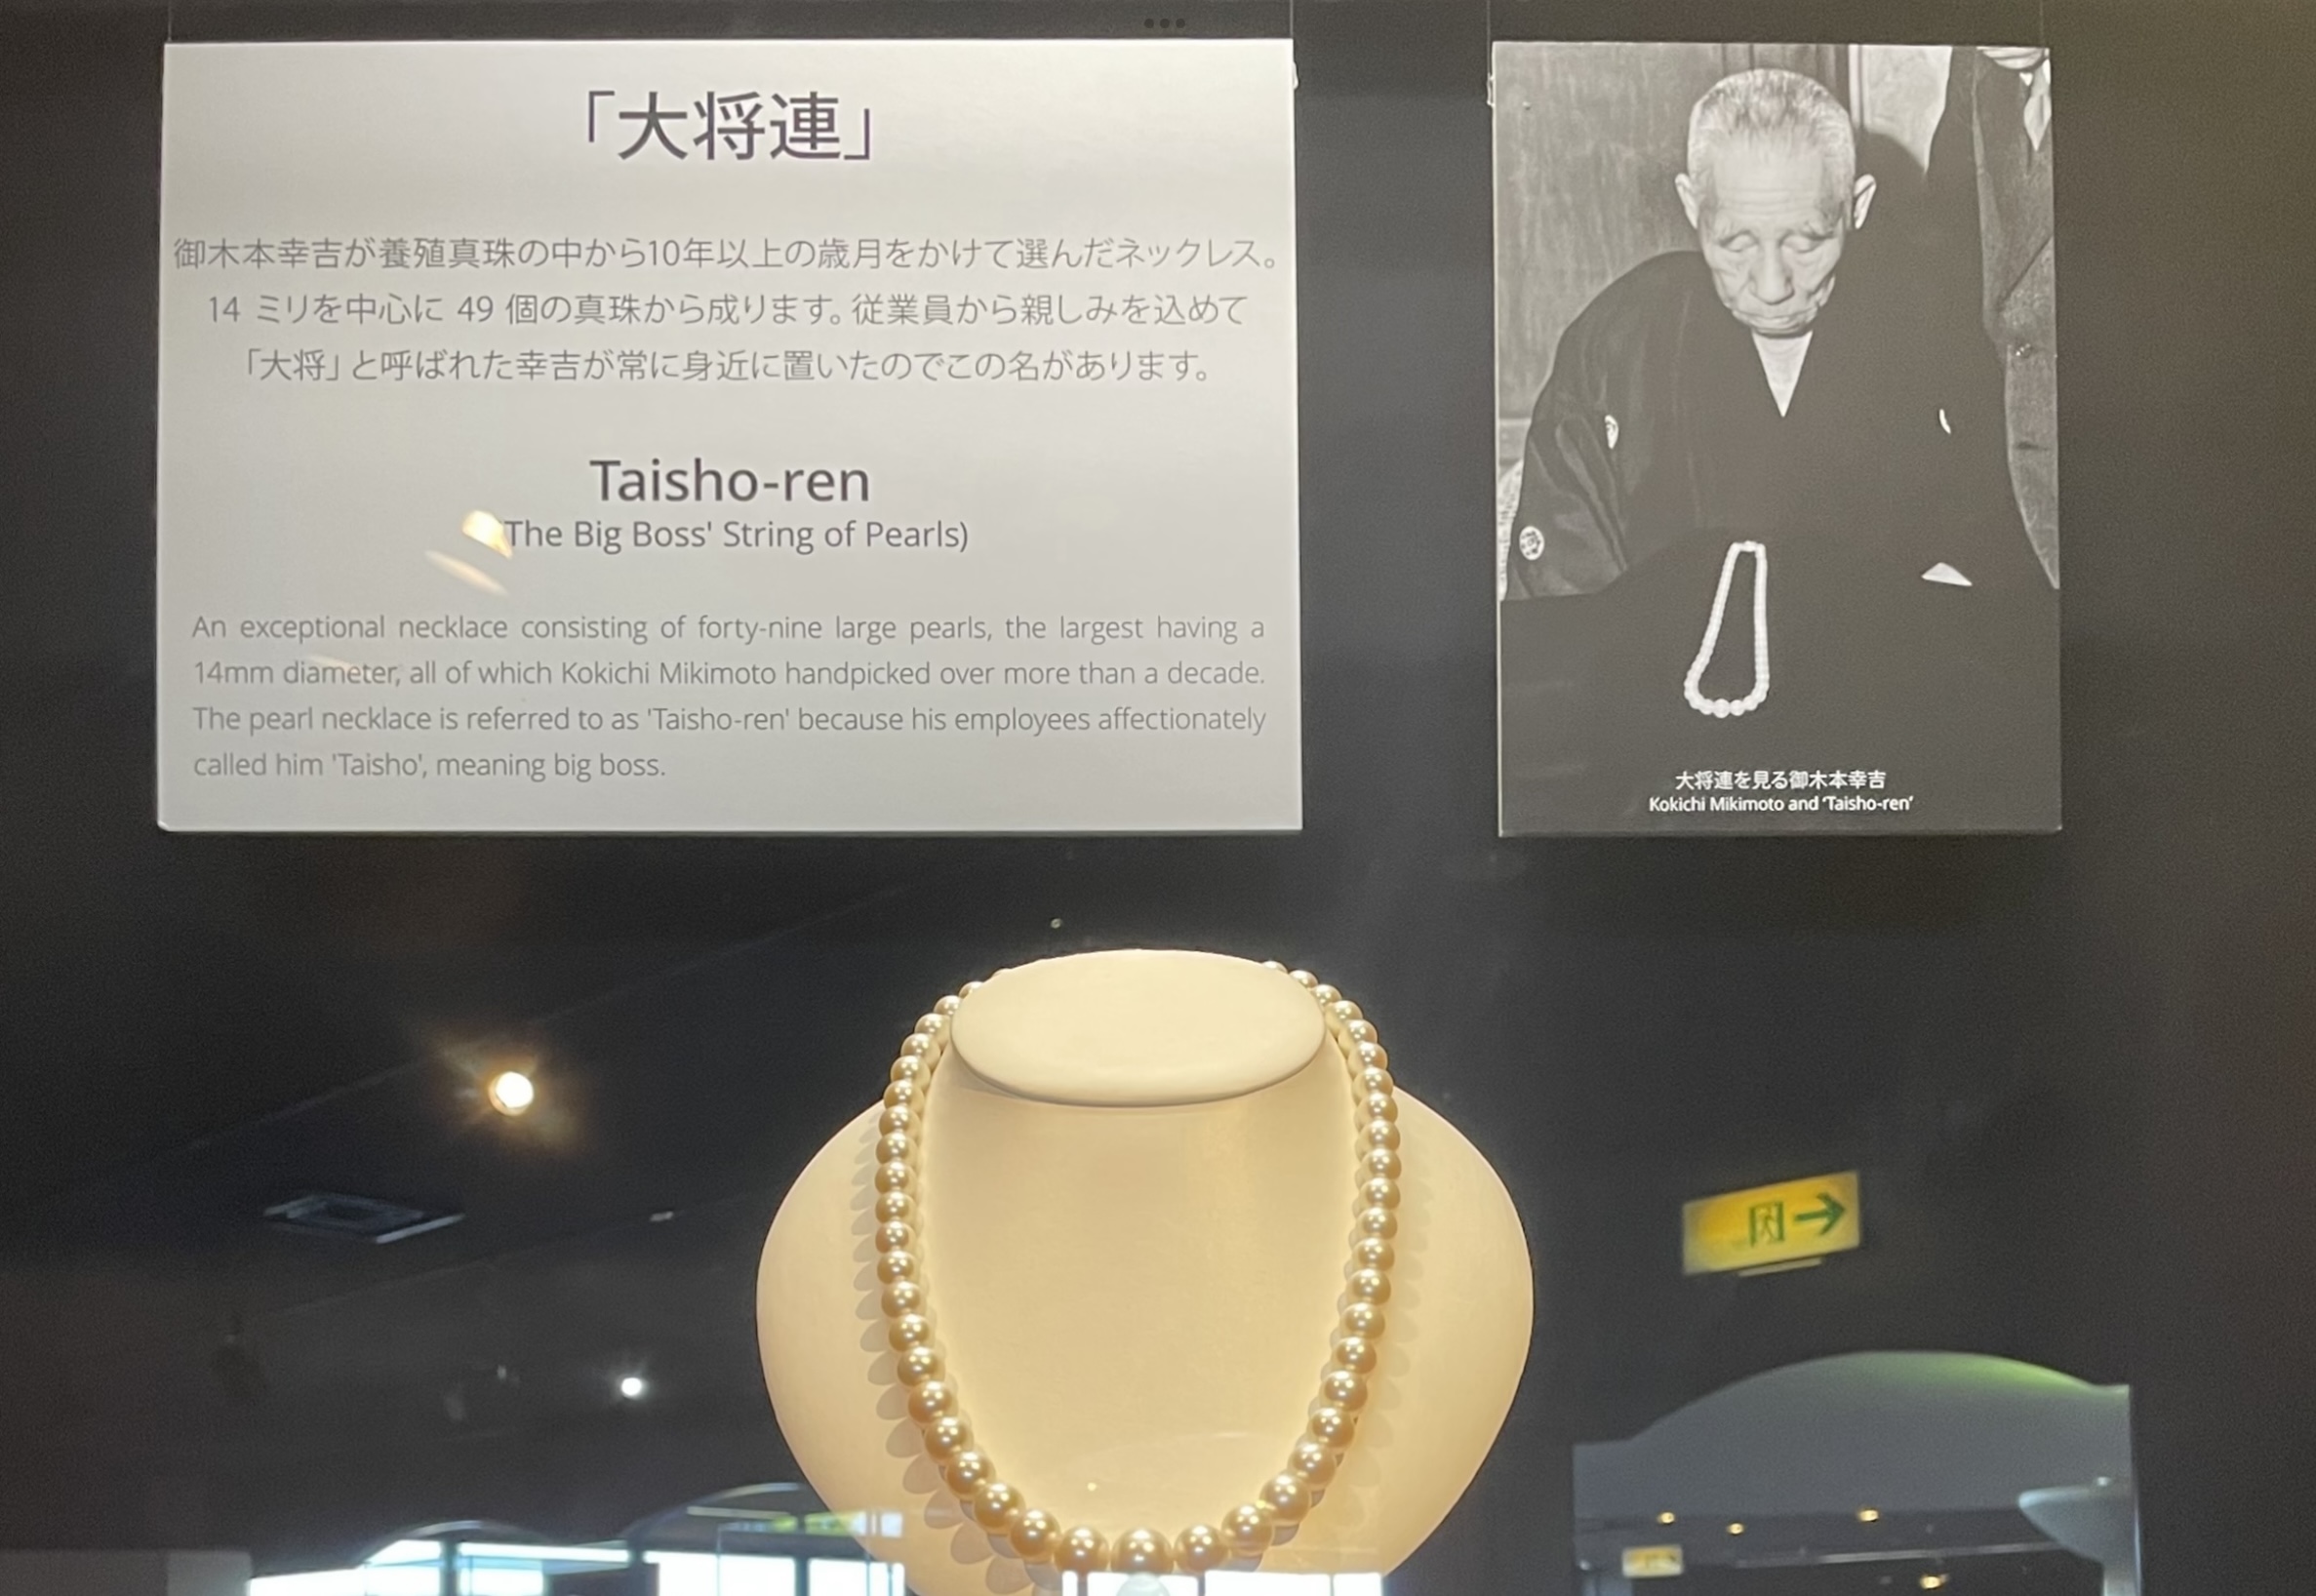 Taisho-ren - the Big Boss' String of Pearls - 14 mm in the center - Mikimoto Pearl Museum